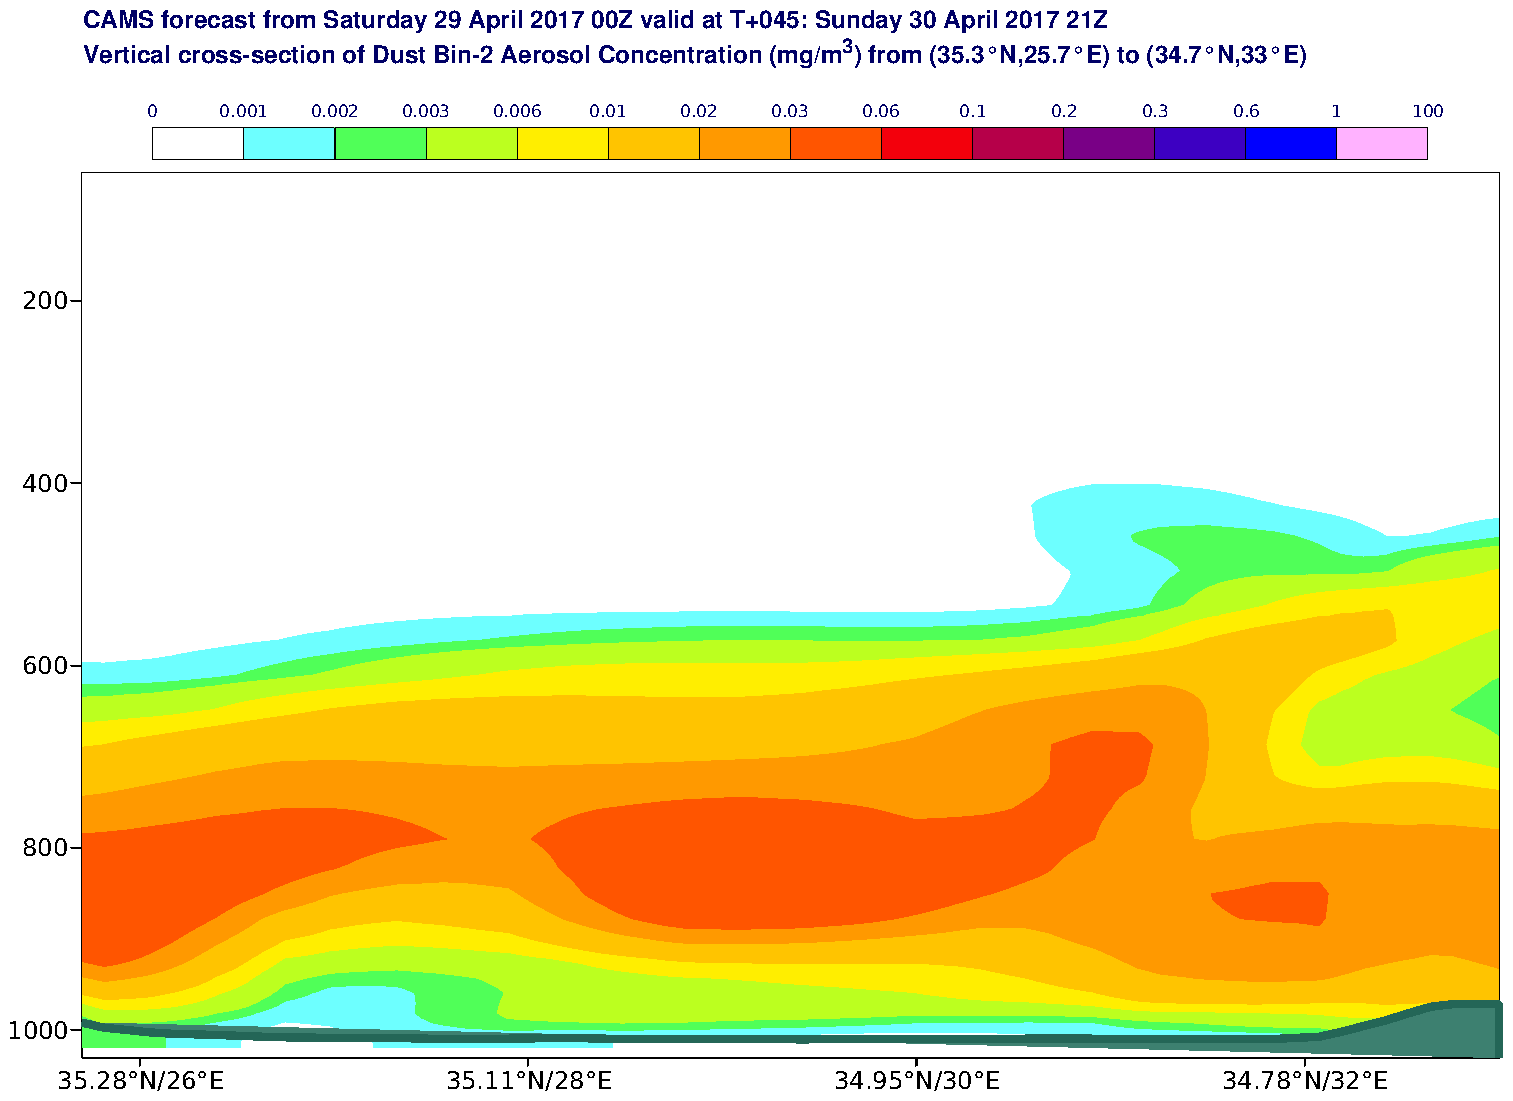 Vertical cross-section of Dust Bin-2 Aerosol Concentration (mg/m3) valid at T45 - 2017-04-30 21:00